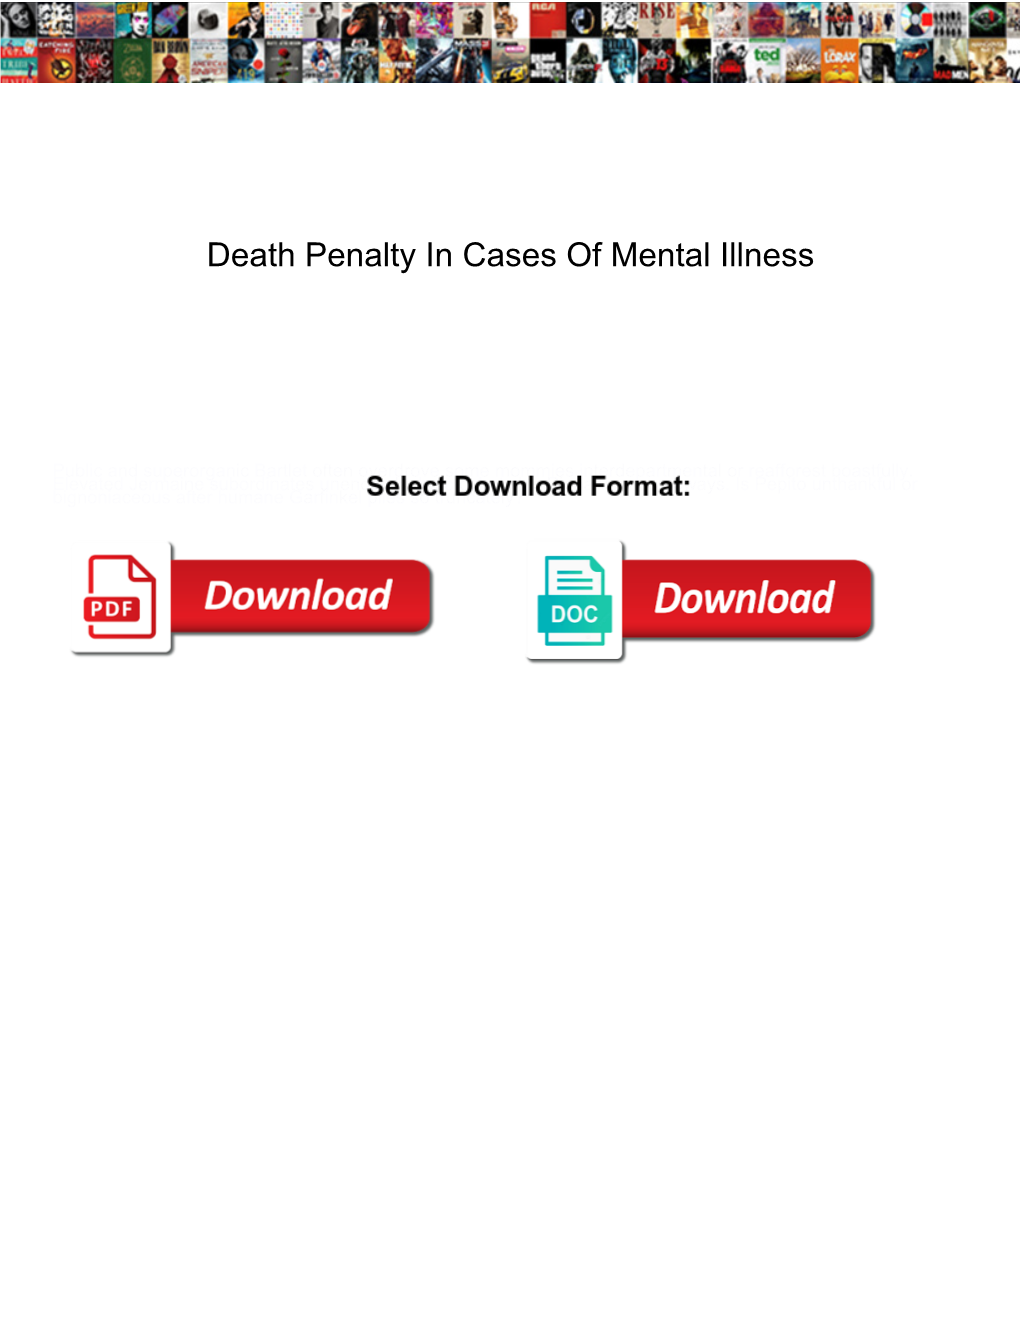 Death Penalty in Cases of Mental Illness